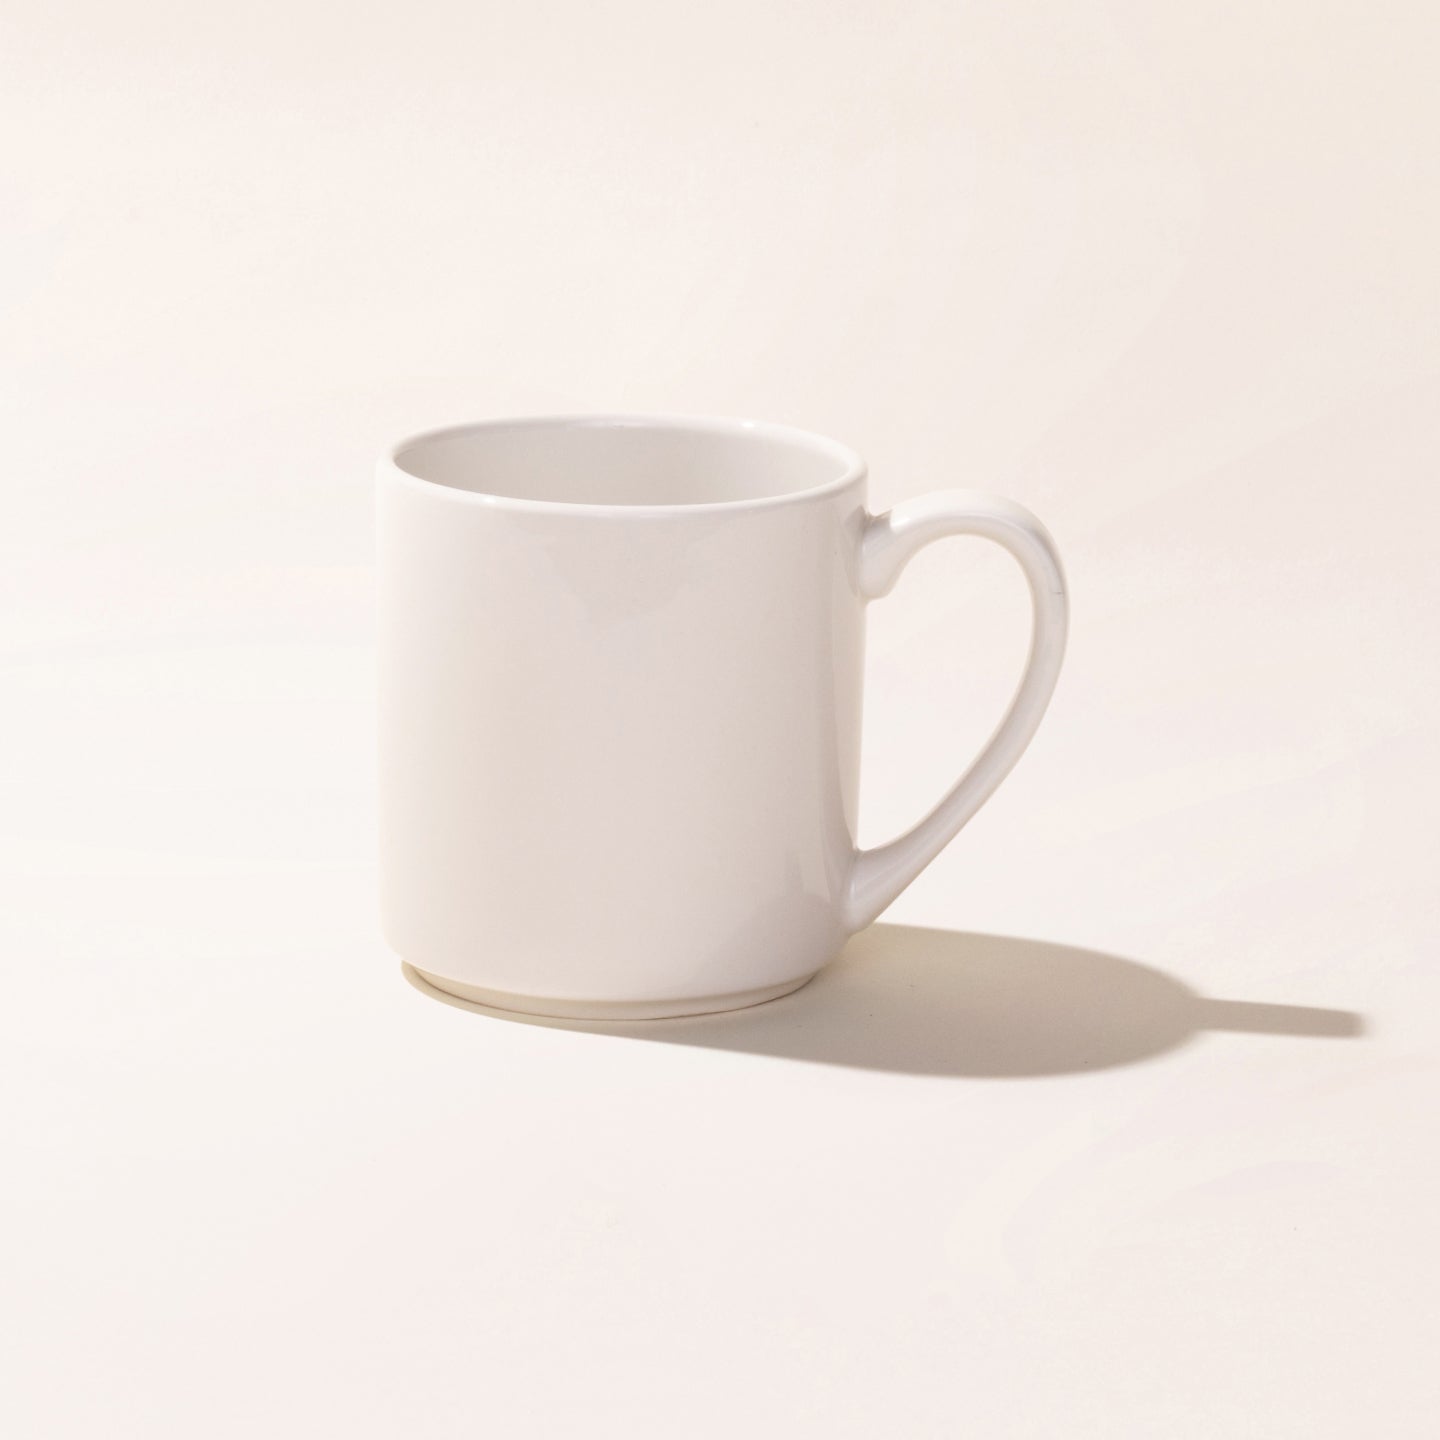 https://cdn.shopify.com/s/files/1/2131/5111/products/Web_P1_Undecorated_CoffeeMug_Top-1.jpg?v=1665757037